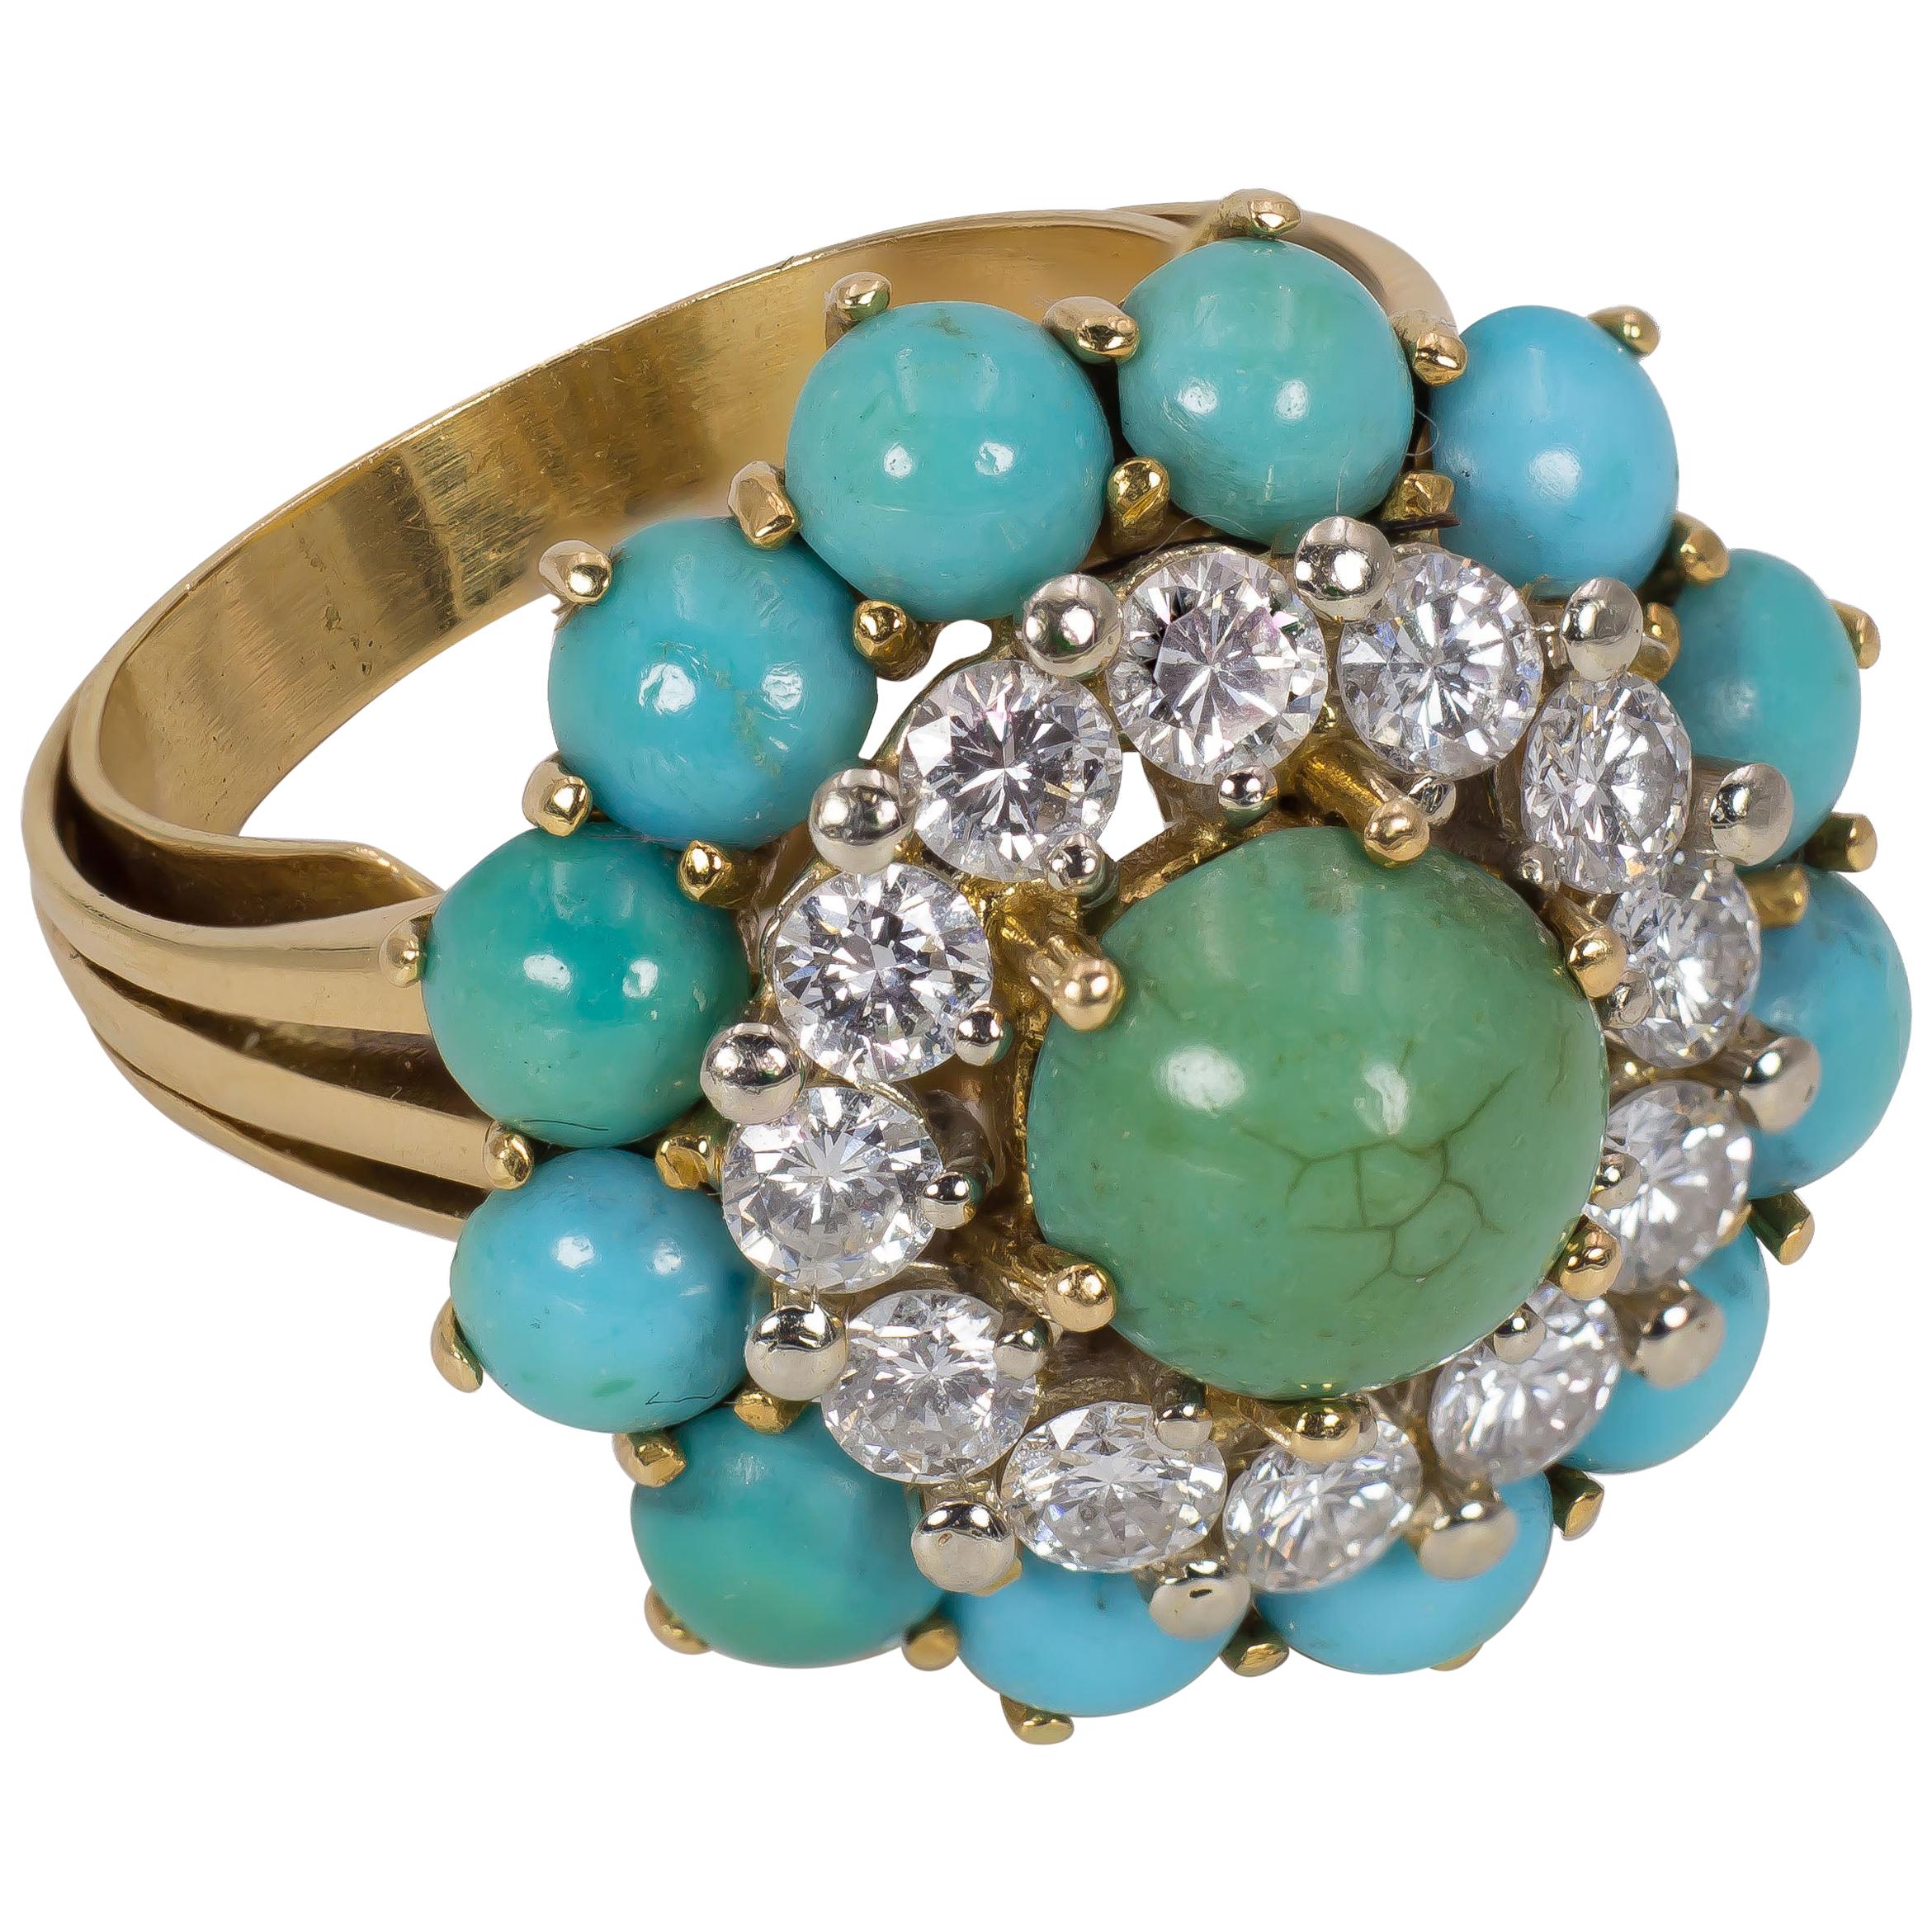 Vintage 18 Karat Gold, 1.2 Carat Diamond and Turquoise Ring, 1960s For Sale